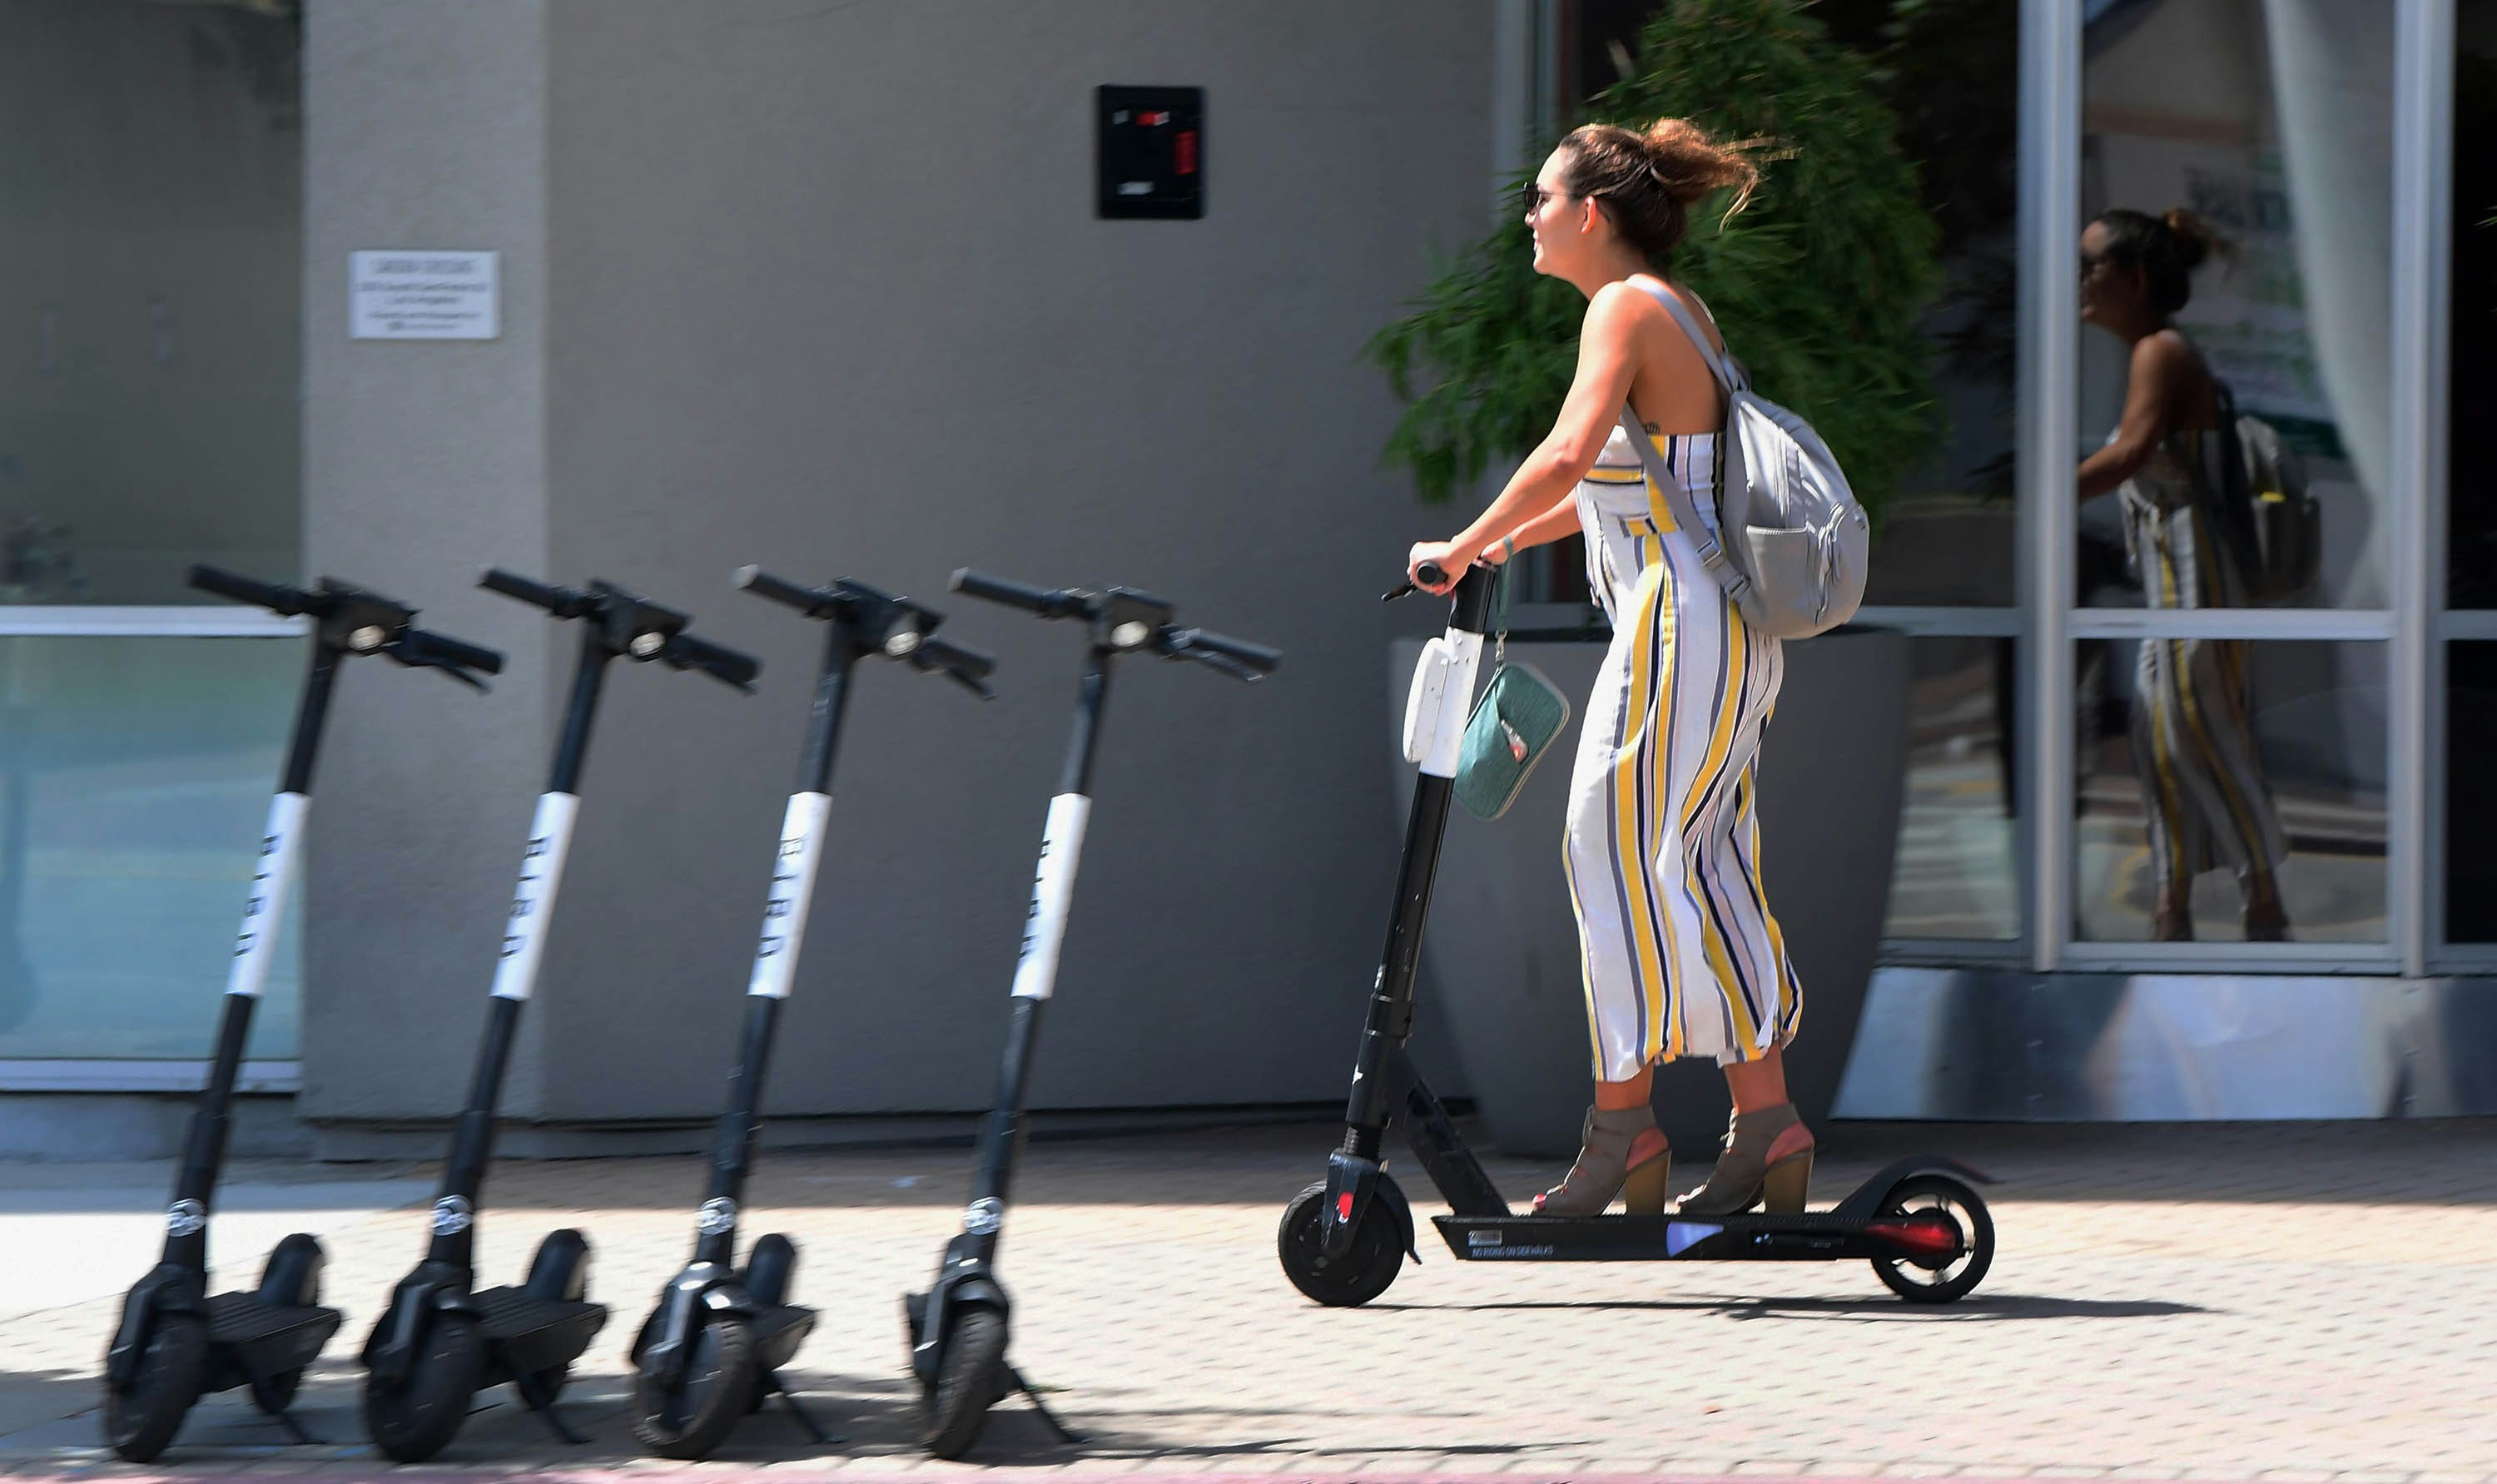 The electric scooter has already been welcomed in many cities